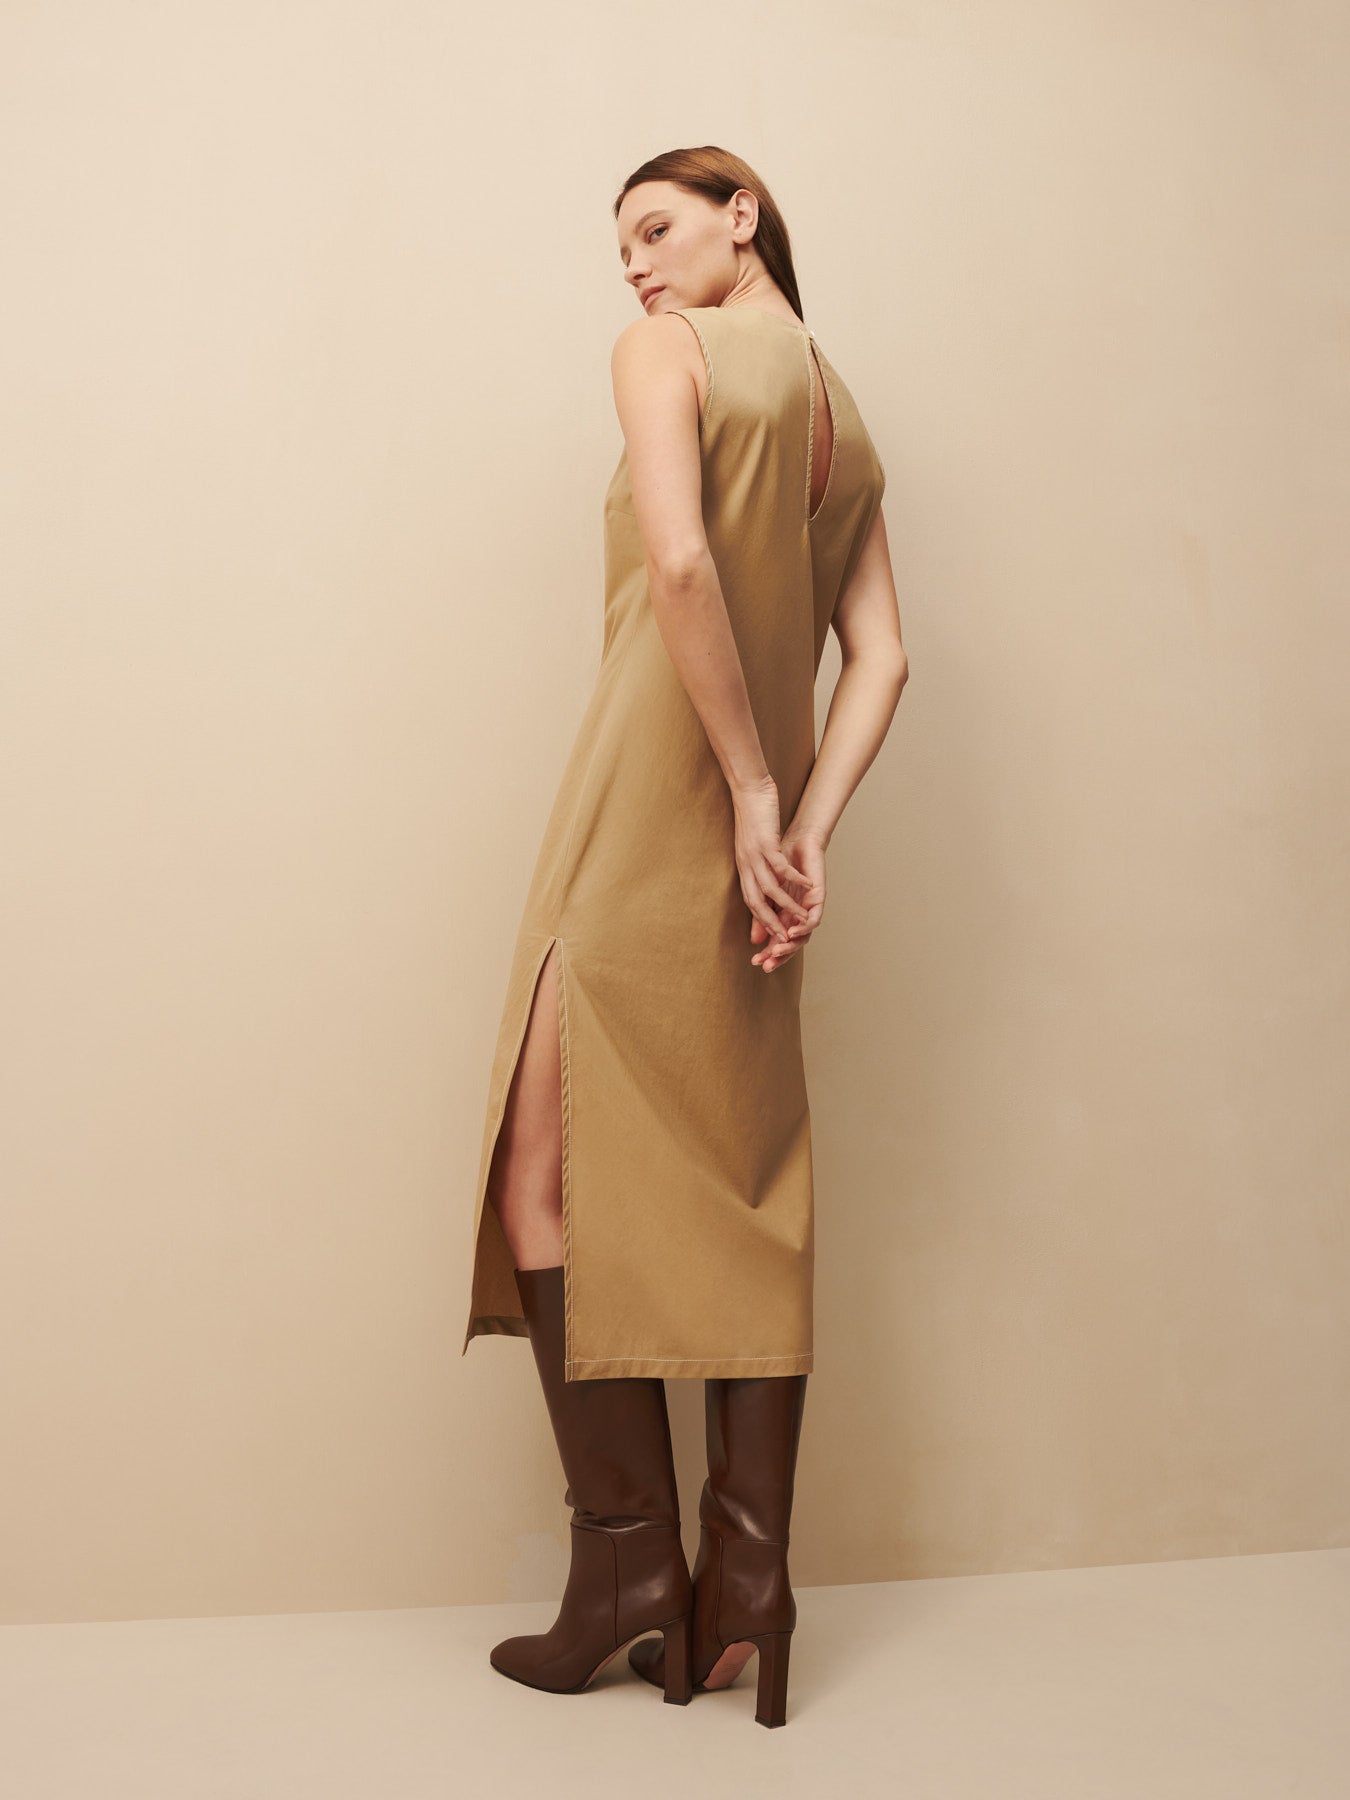 TWP Camel Delaney dress in camel view 5